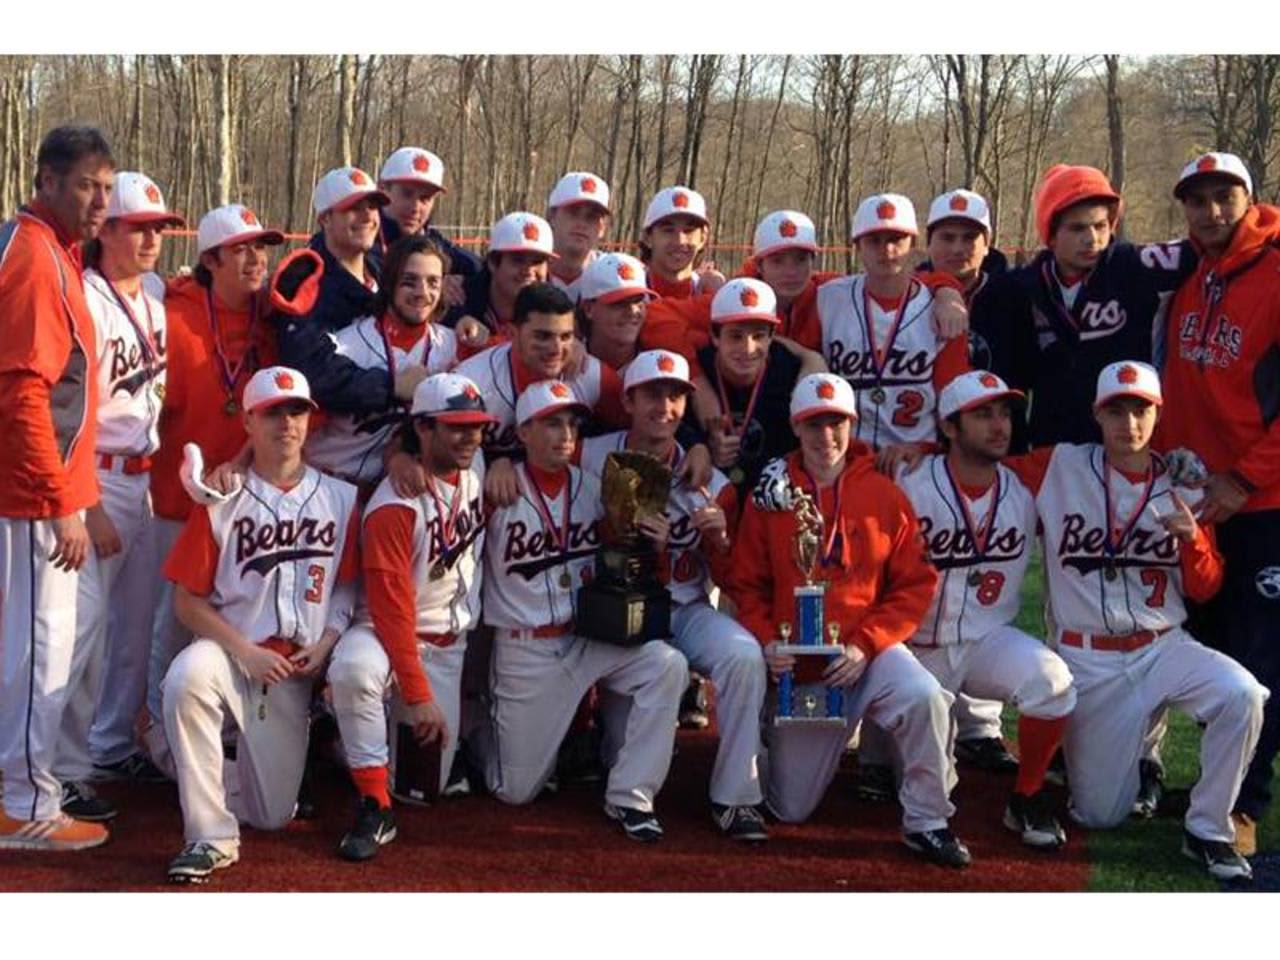 The Briarcliff High School baseball team with their first place trophy.